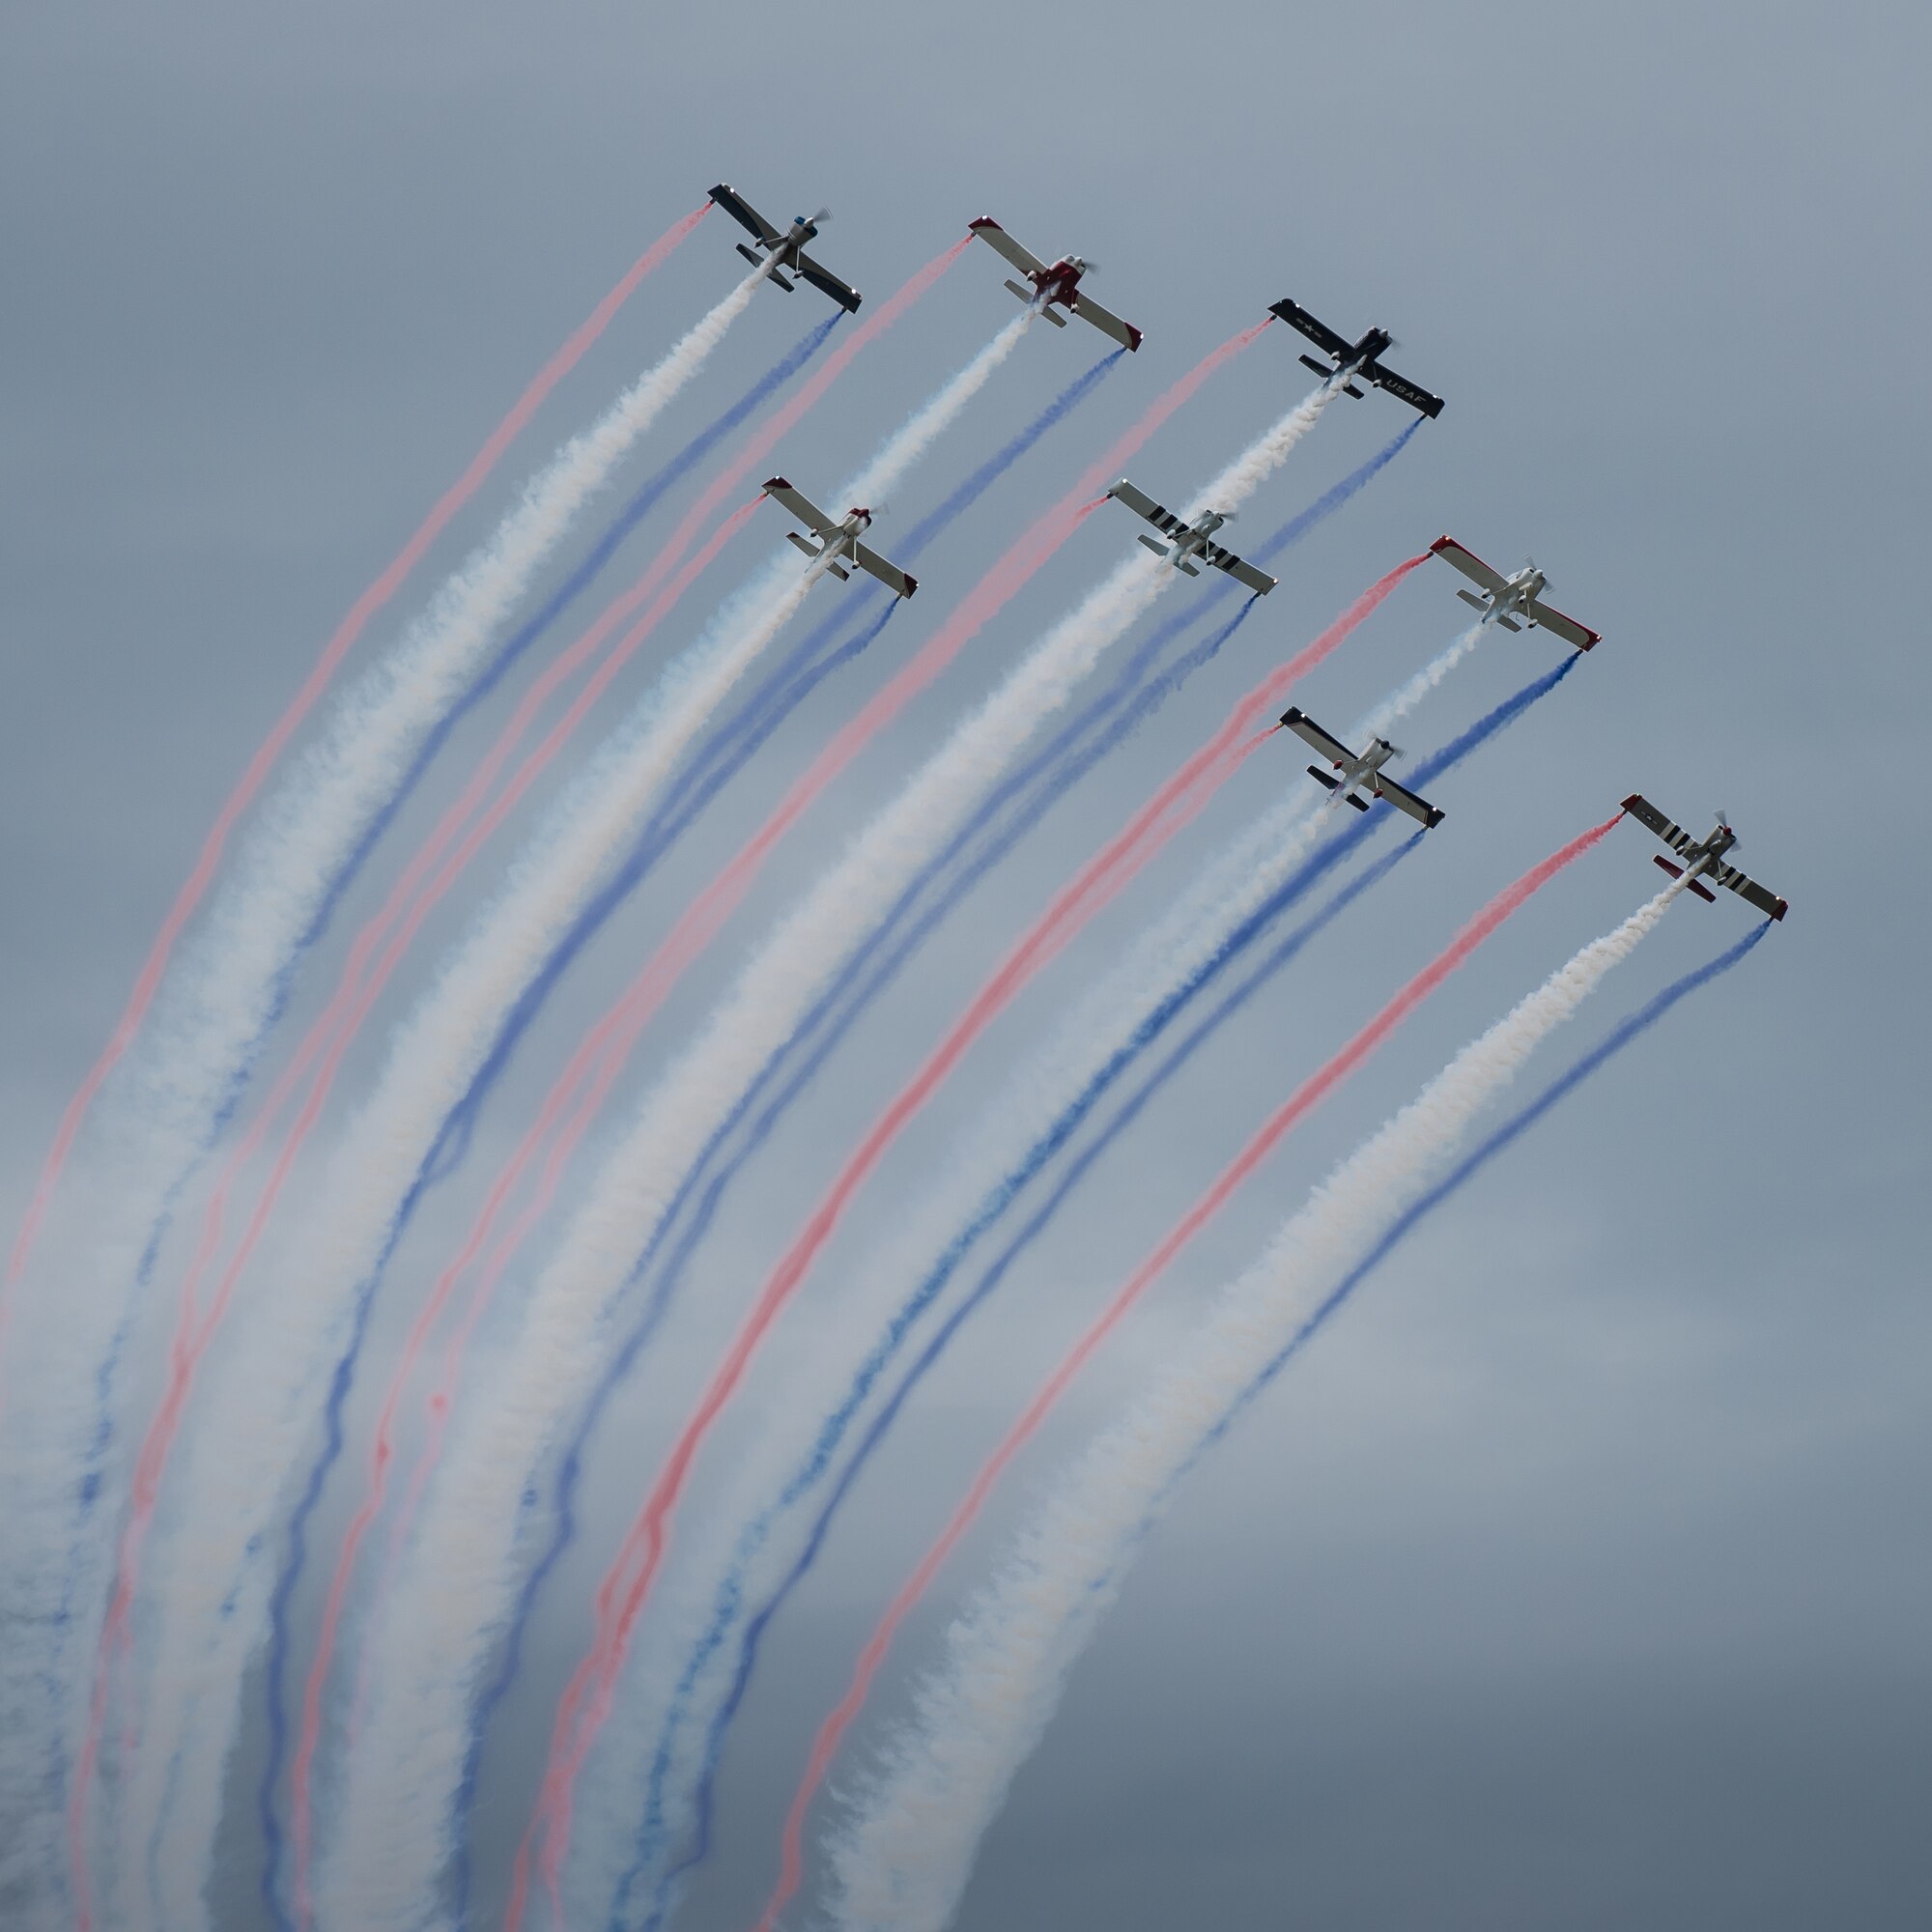 RV-4 pilots with the KC Flight Team perform an aerial demonstration during the Thunder Over Louisville airshow in Louisville, Ky., April 13, 2019. The Kentucky Air National Guard once again served as the base of operations for military aircraft participating in the annual event, which has grown to become one of the largest single-day air shows in North America. (U.S. Air National Guard photo by Dale Greer)